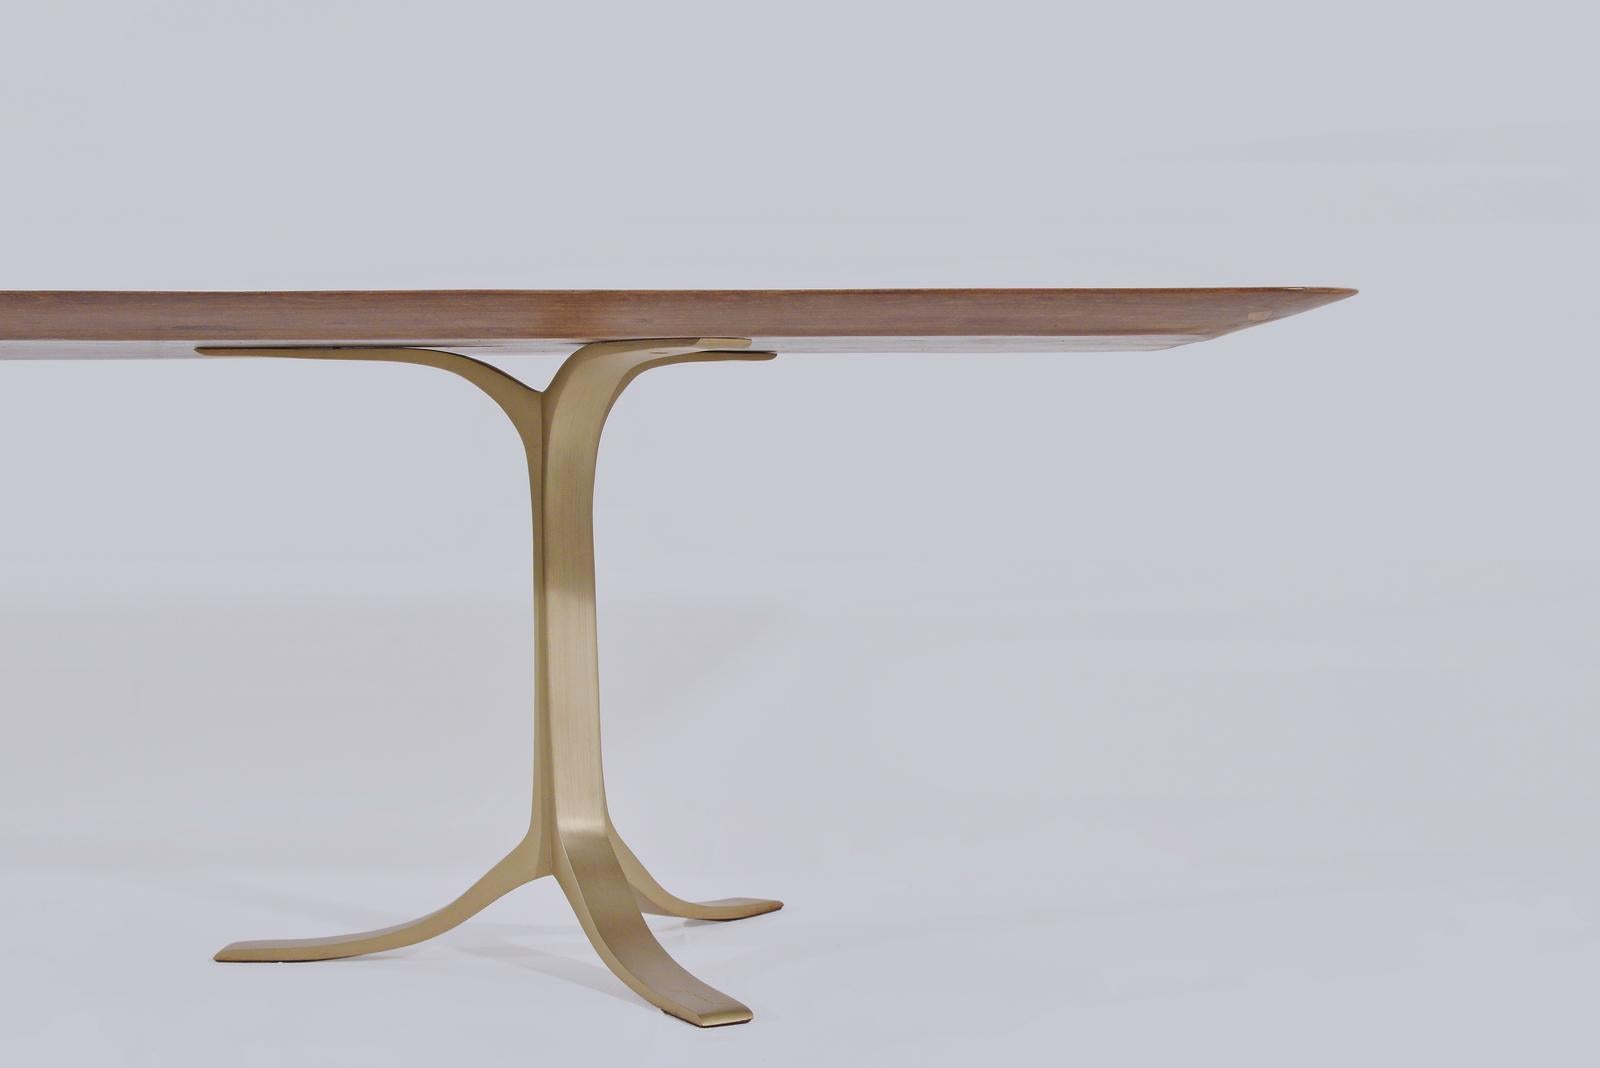 Bespoke Chef Table, Reclaimed Wood, Sand Cast Brass Base, by P. Tendercool For Sale 1